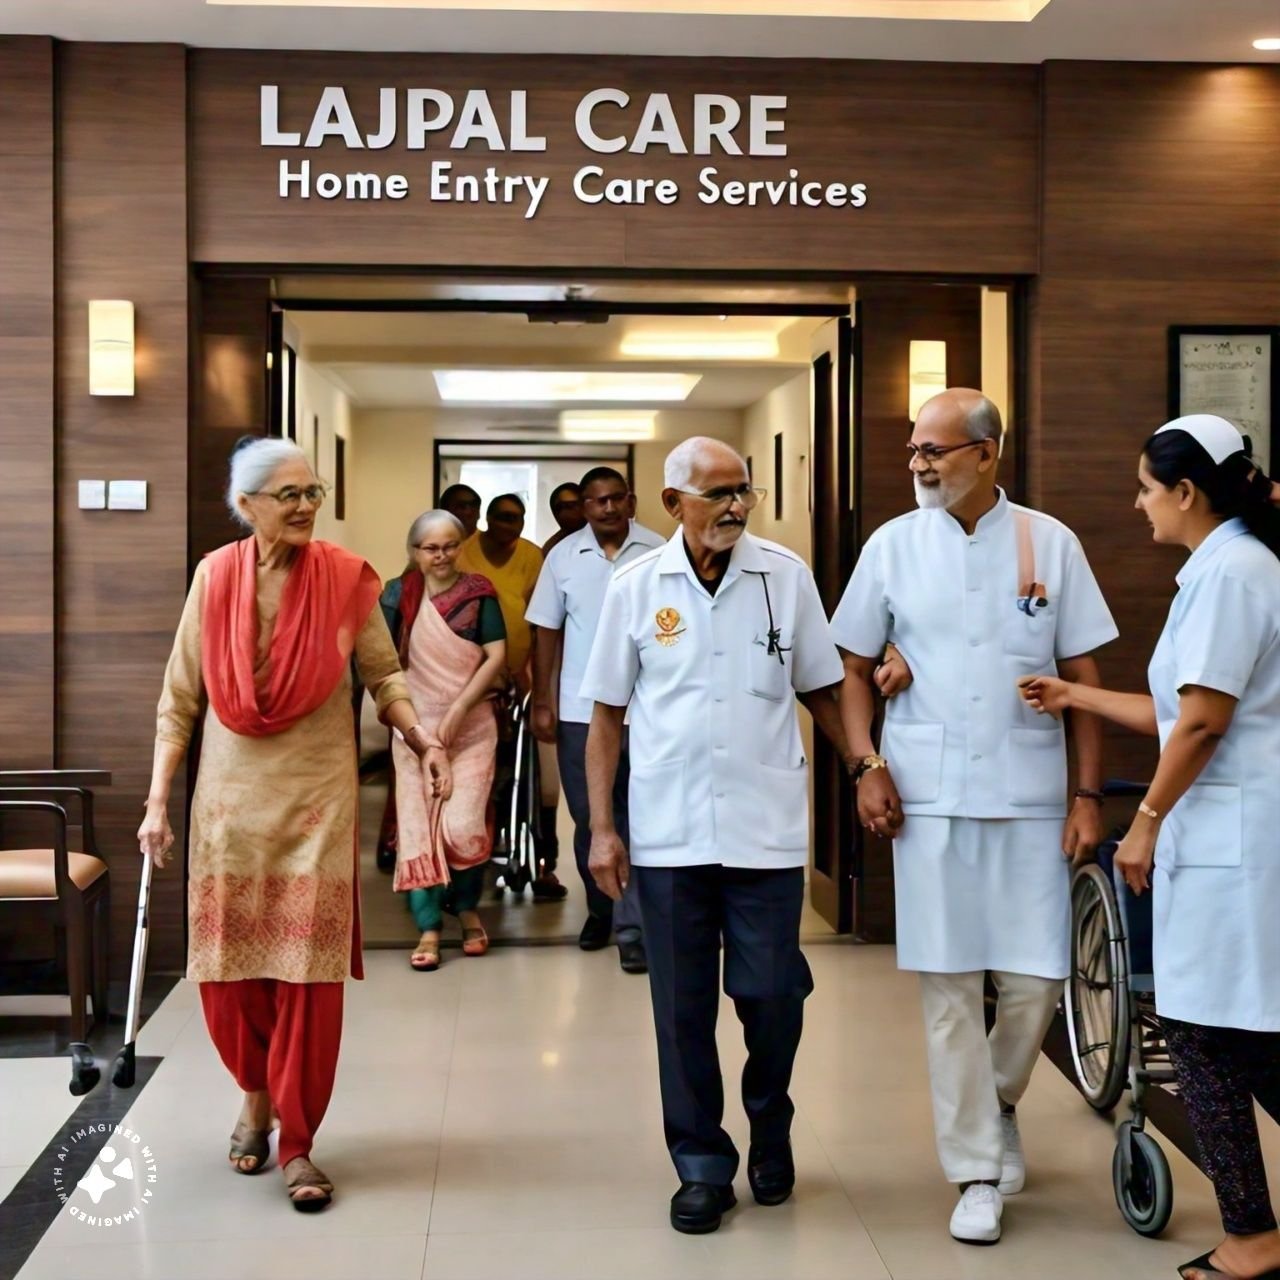 Basic Duties & Responsibilities of a Home Health Nurse at Lajpal Care